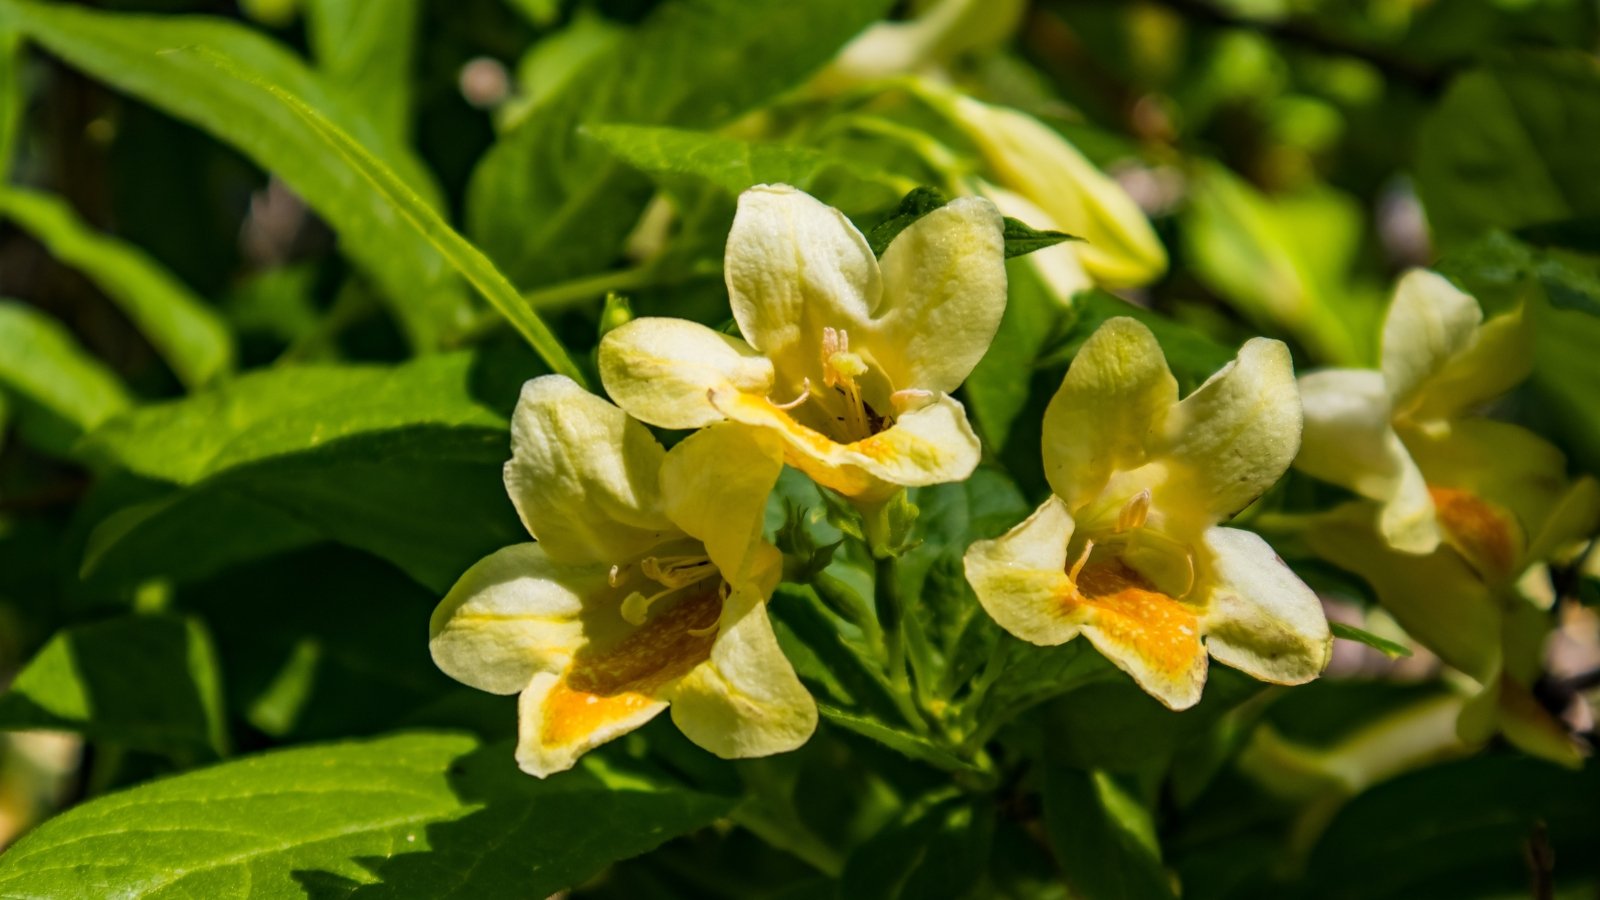 Bright yellow 'Lemon Ice' weigela flowers gleam in the sunlight, with lush green leaves serving as a backdrop, creating a vibrant and cheerful close-up scene of natural beauty.